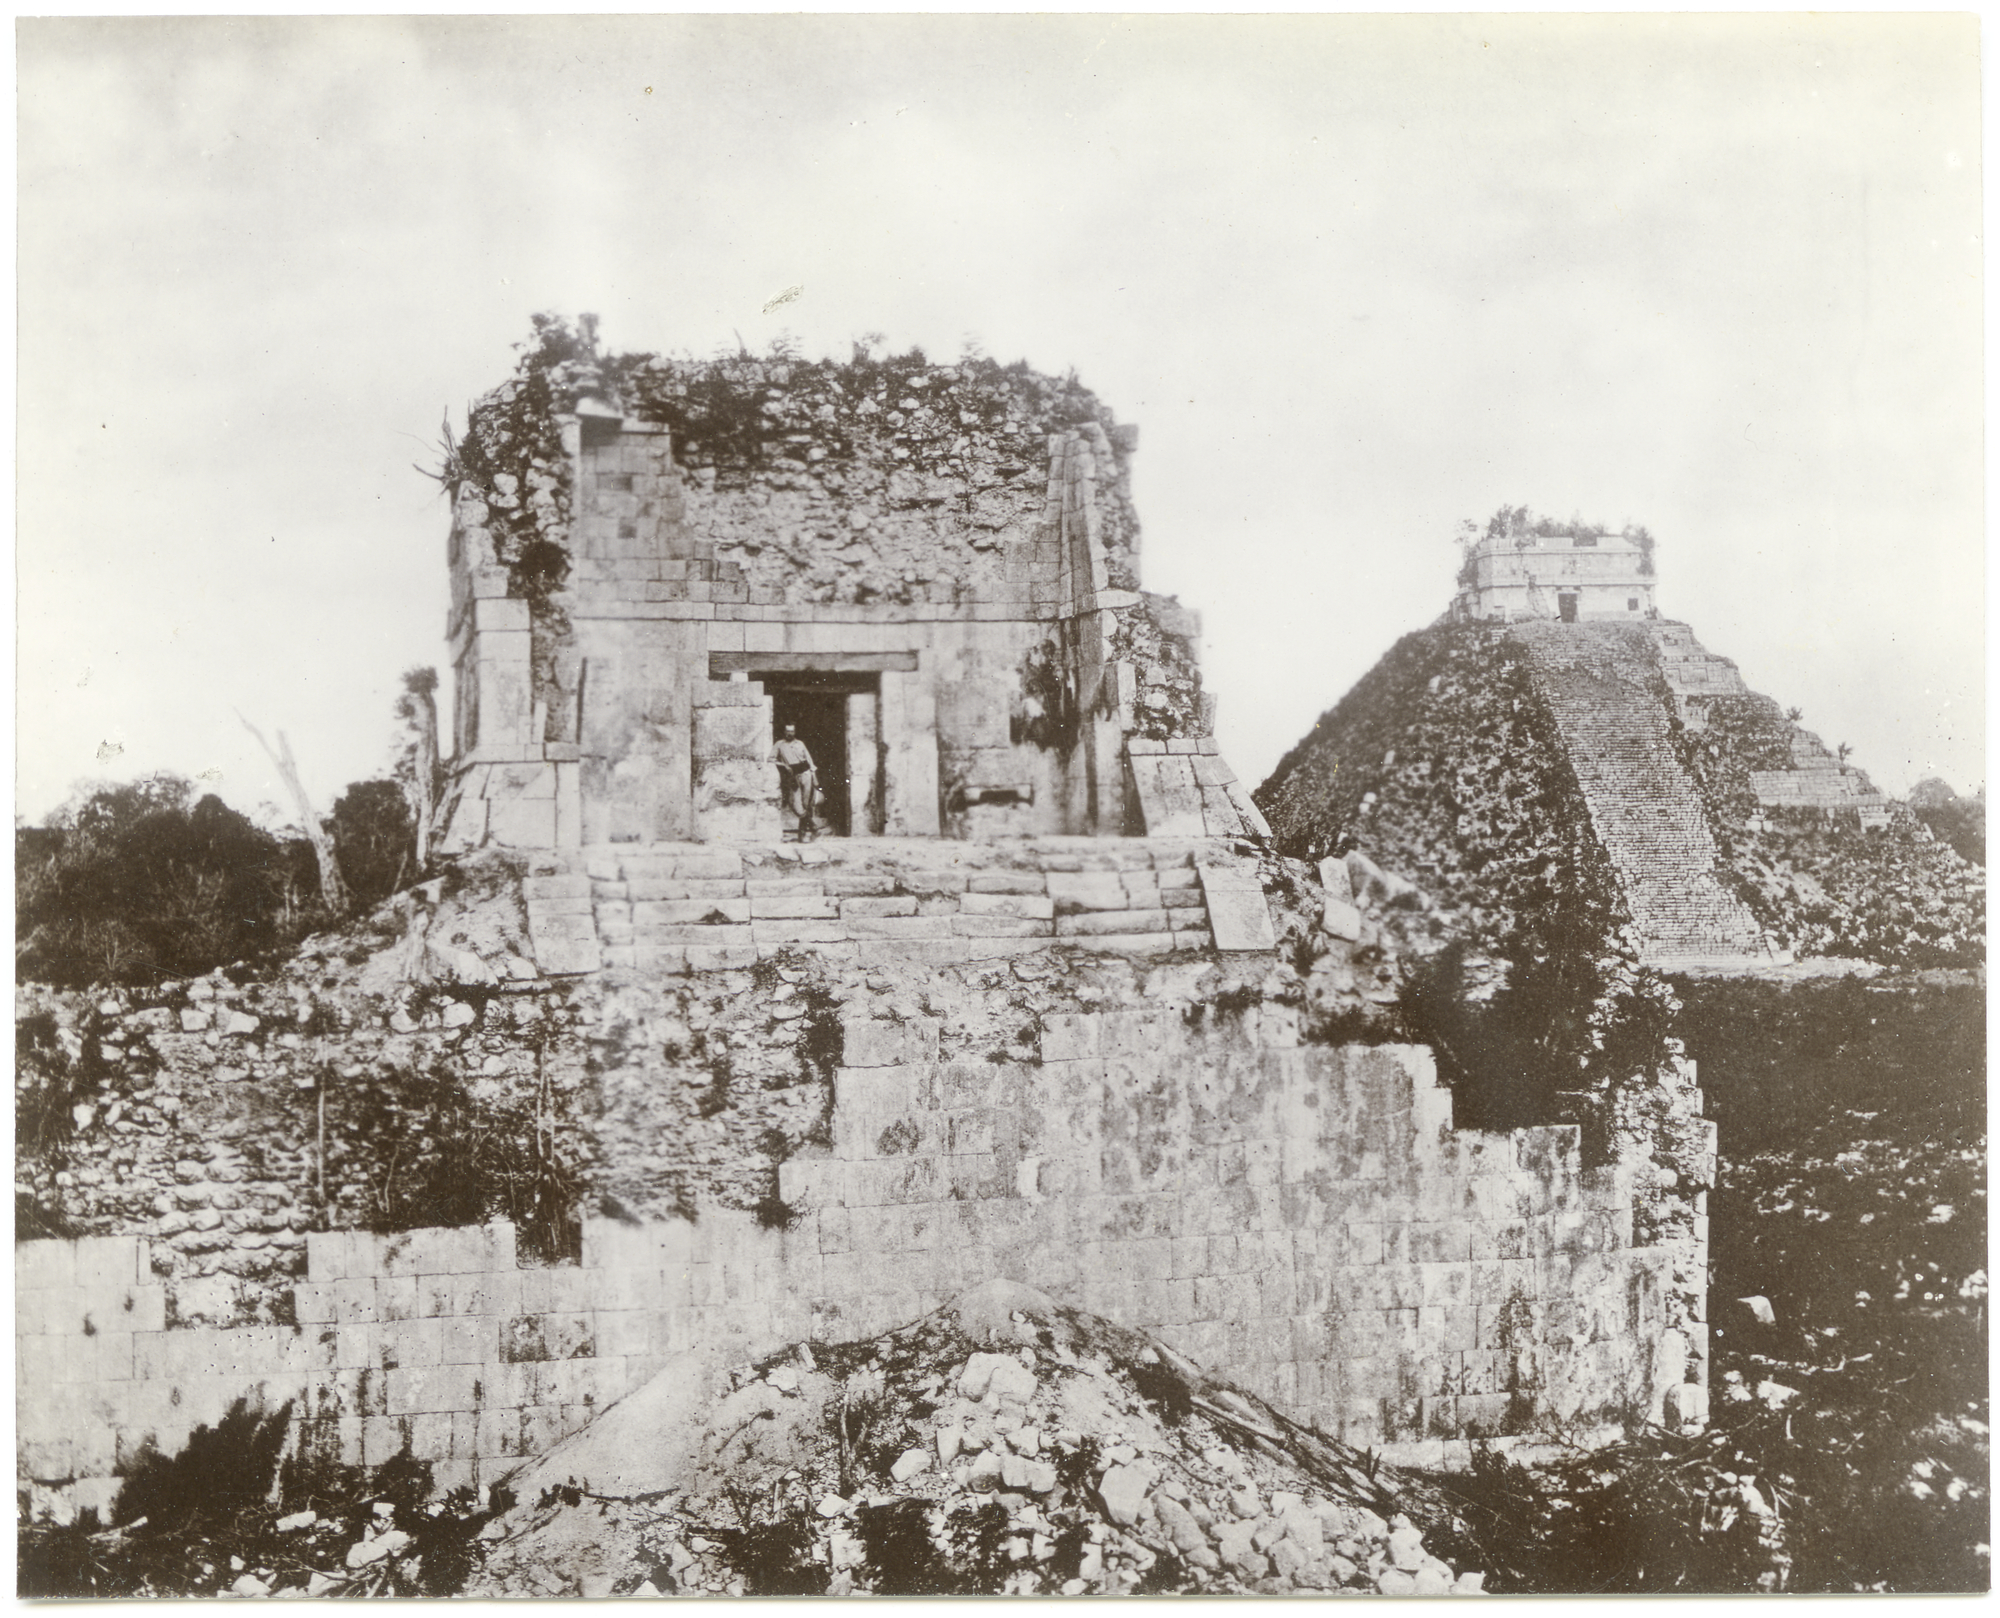 Photograph of the Upper Temple of the Jaguars in the 1890s